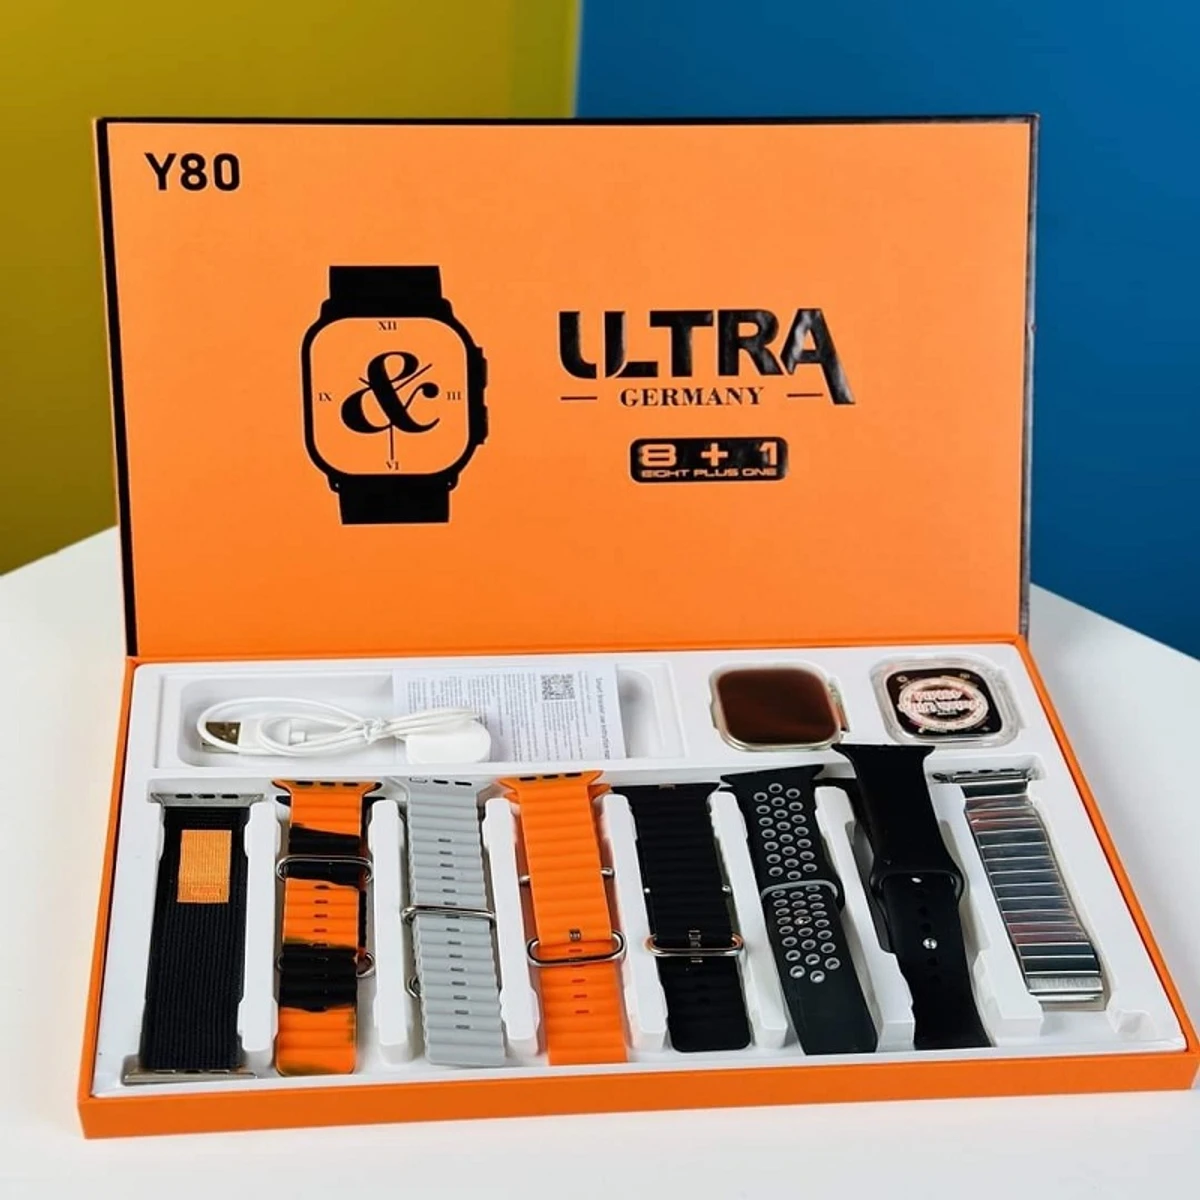 Y80 Ultra Germany Smartwatch With 8+1 Strap